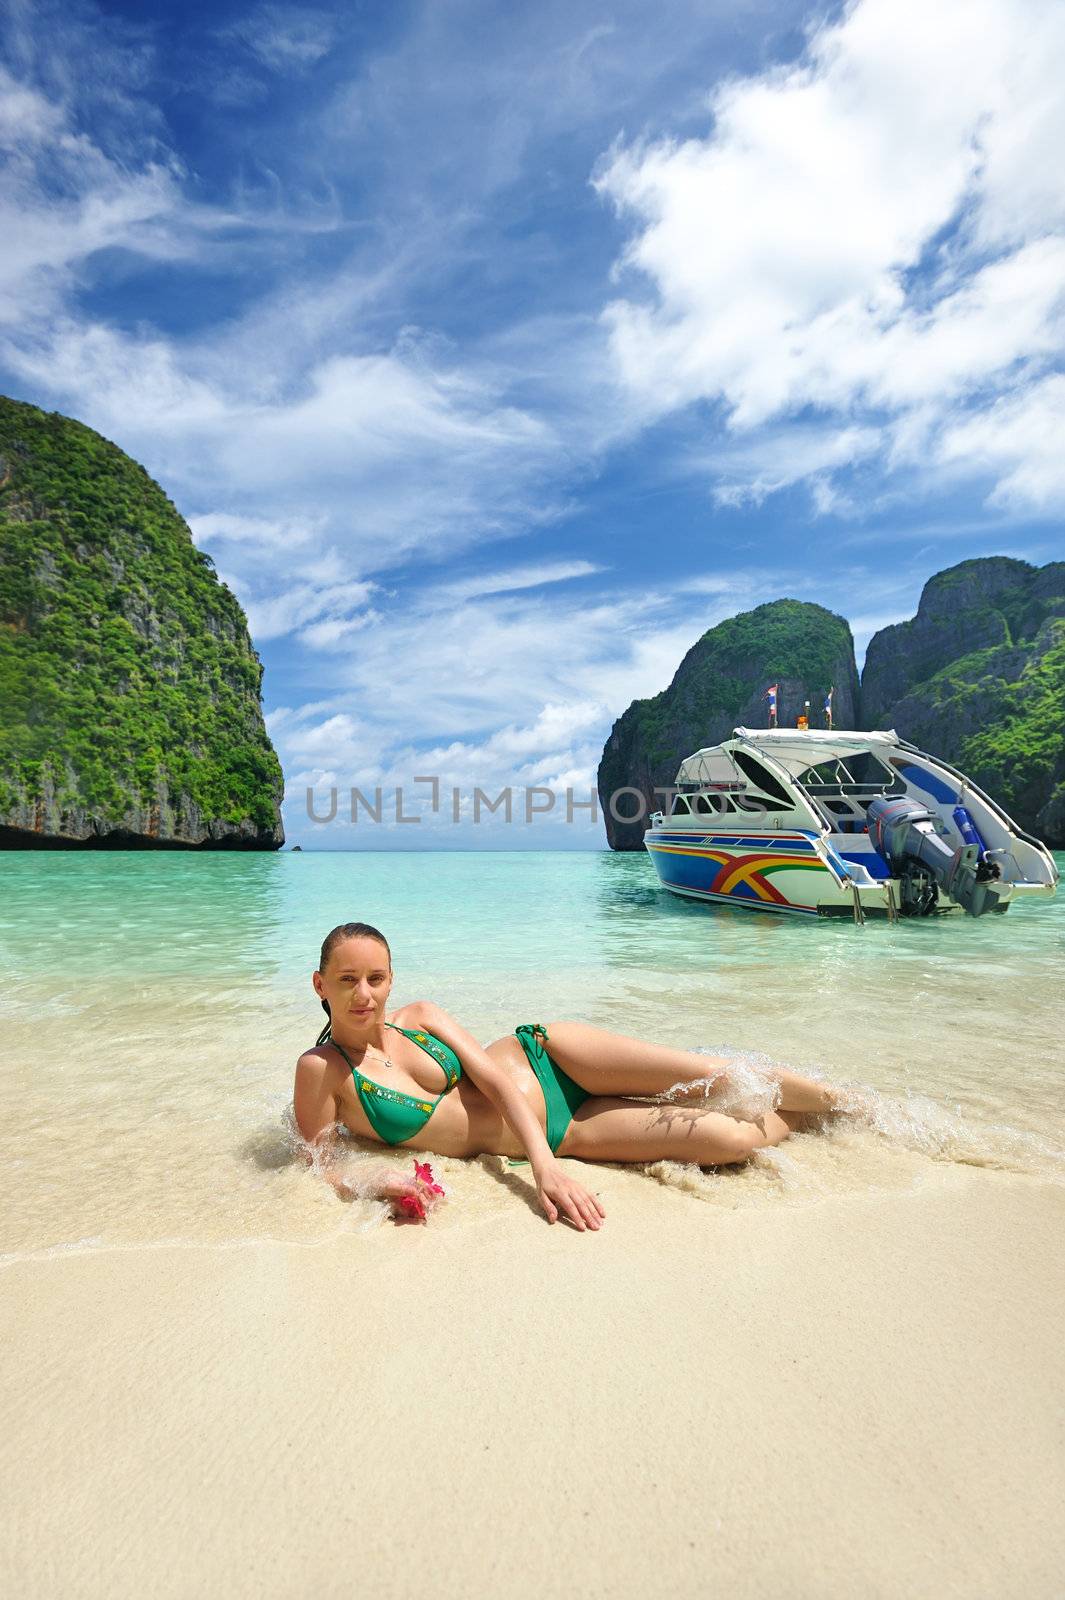 Woman in beautiful lagoon at  Phi Phi Ley island, the exact place where "The Beach" movie was filmed